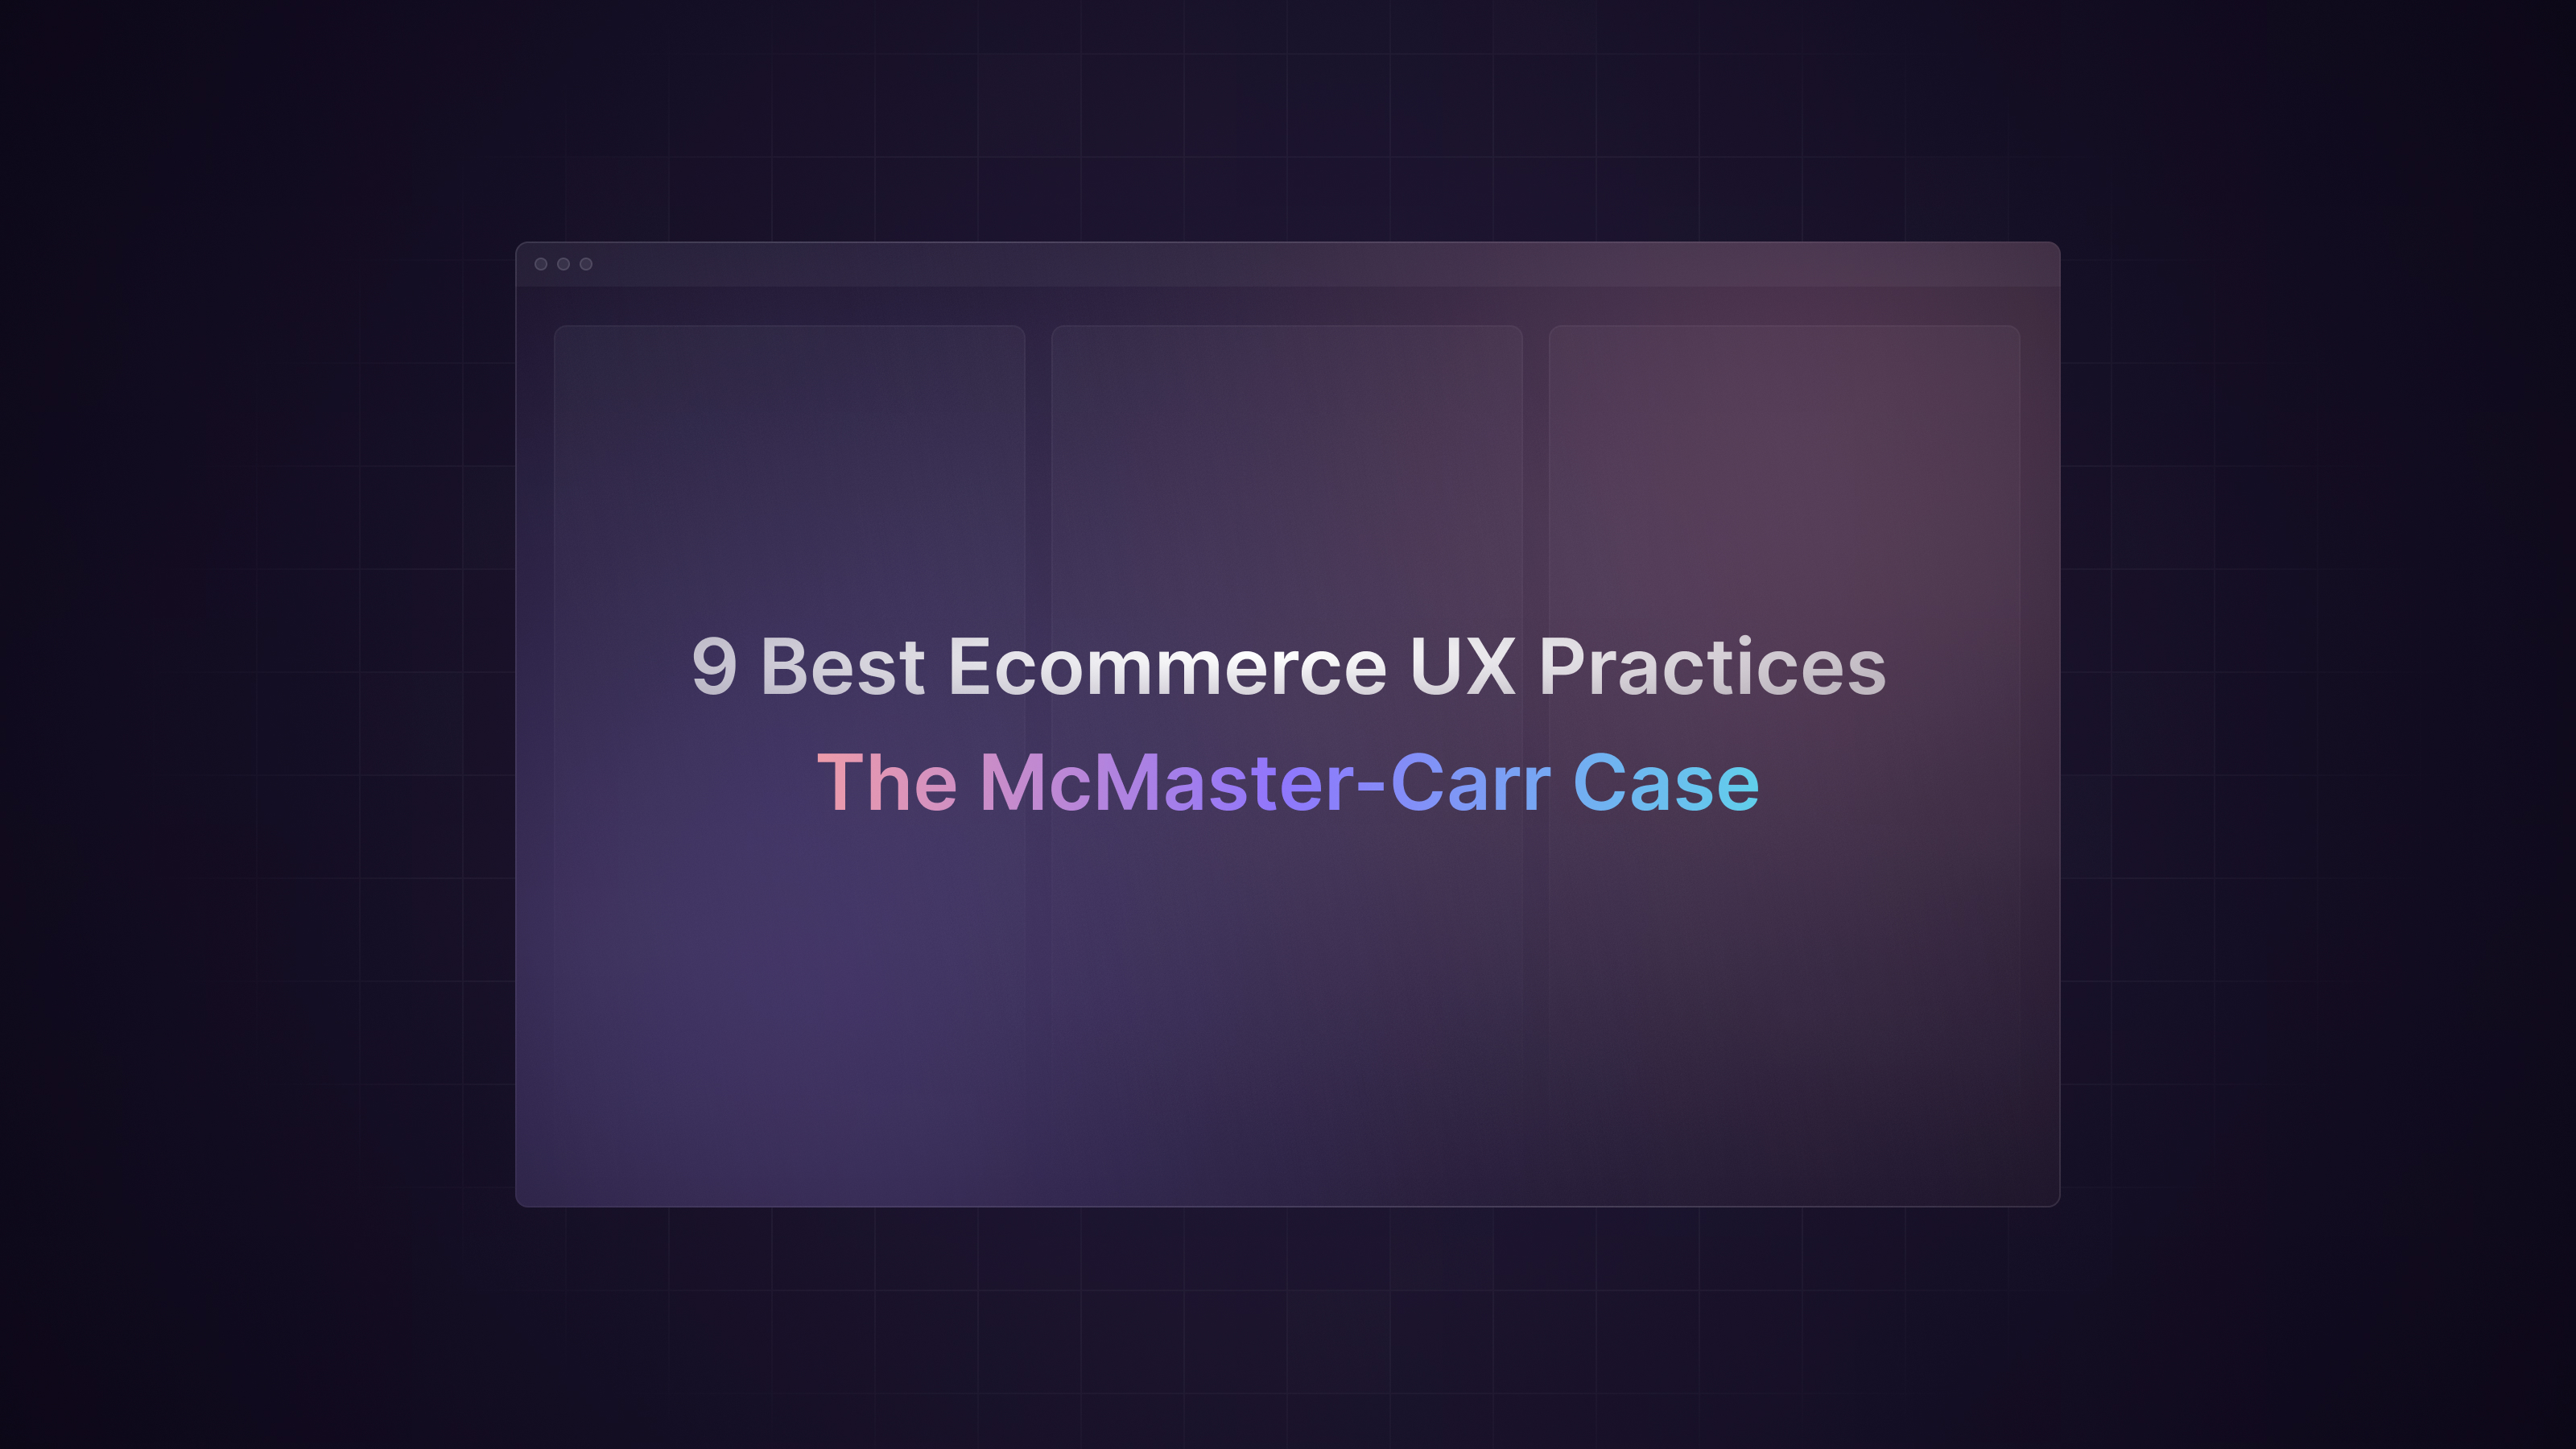 9 Best eCommerce UX Practices With Examples